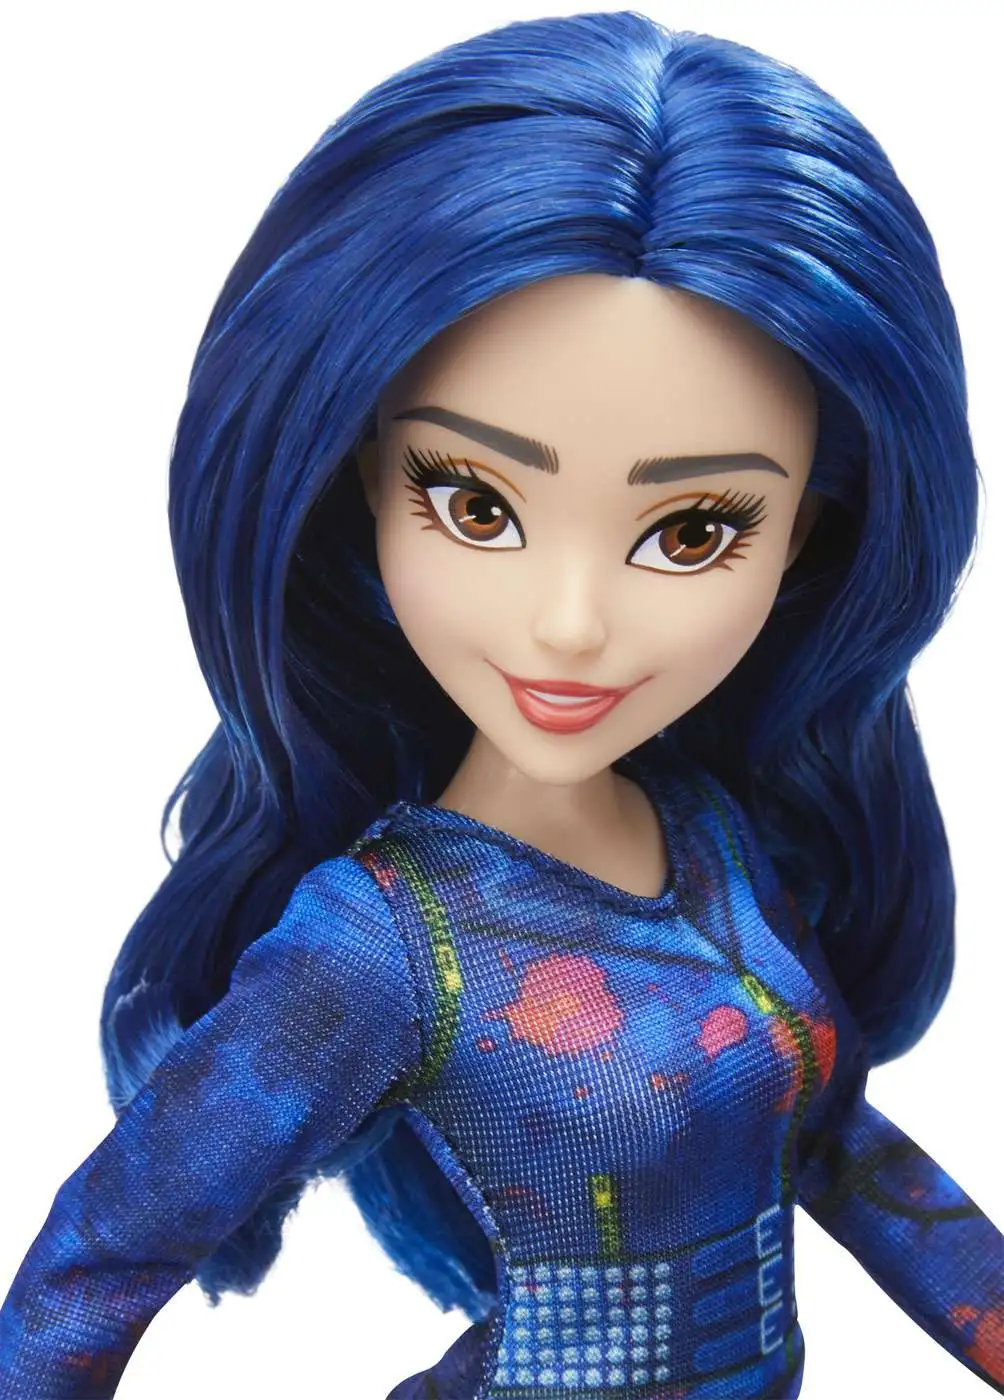 Disney Descendants 3 Isle of The Lost Collection Dolls Pack of 4 for sale  online